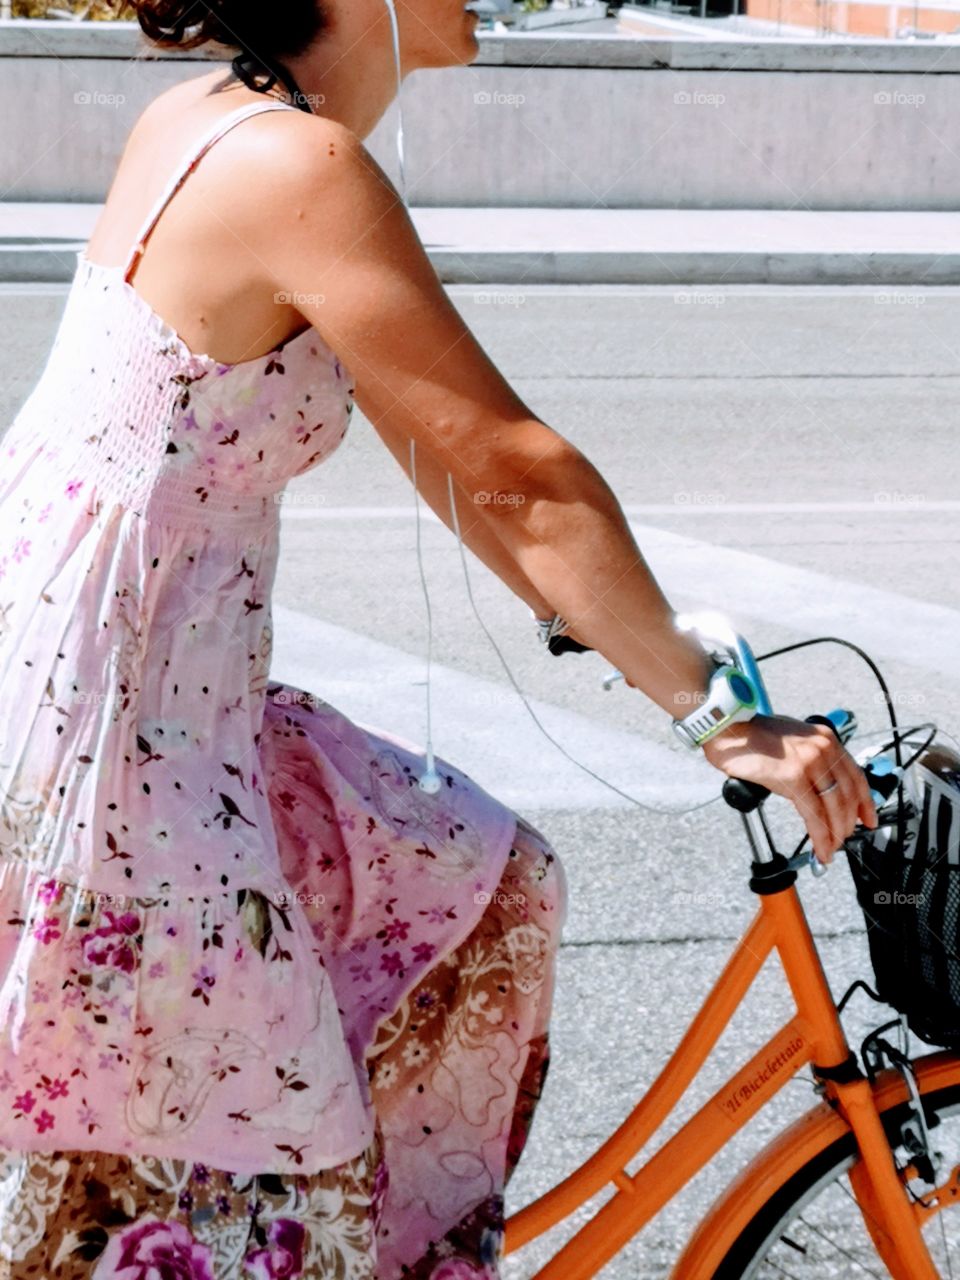 Detail of a woman on a bicycle.